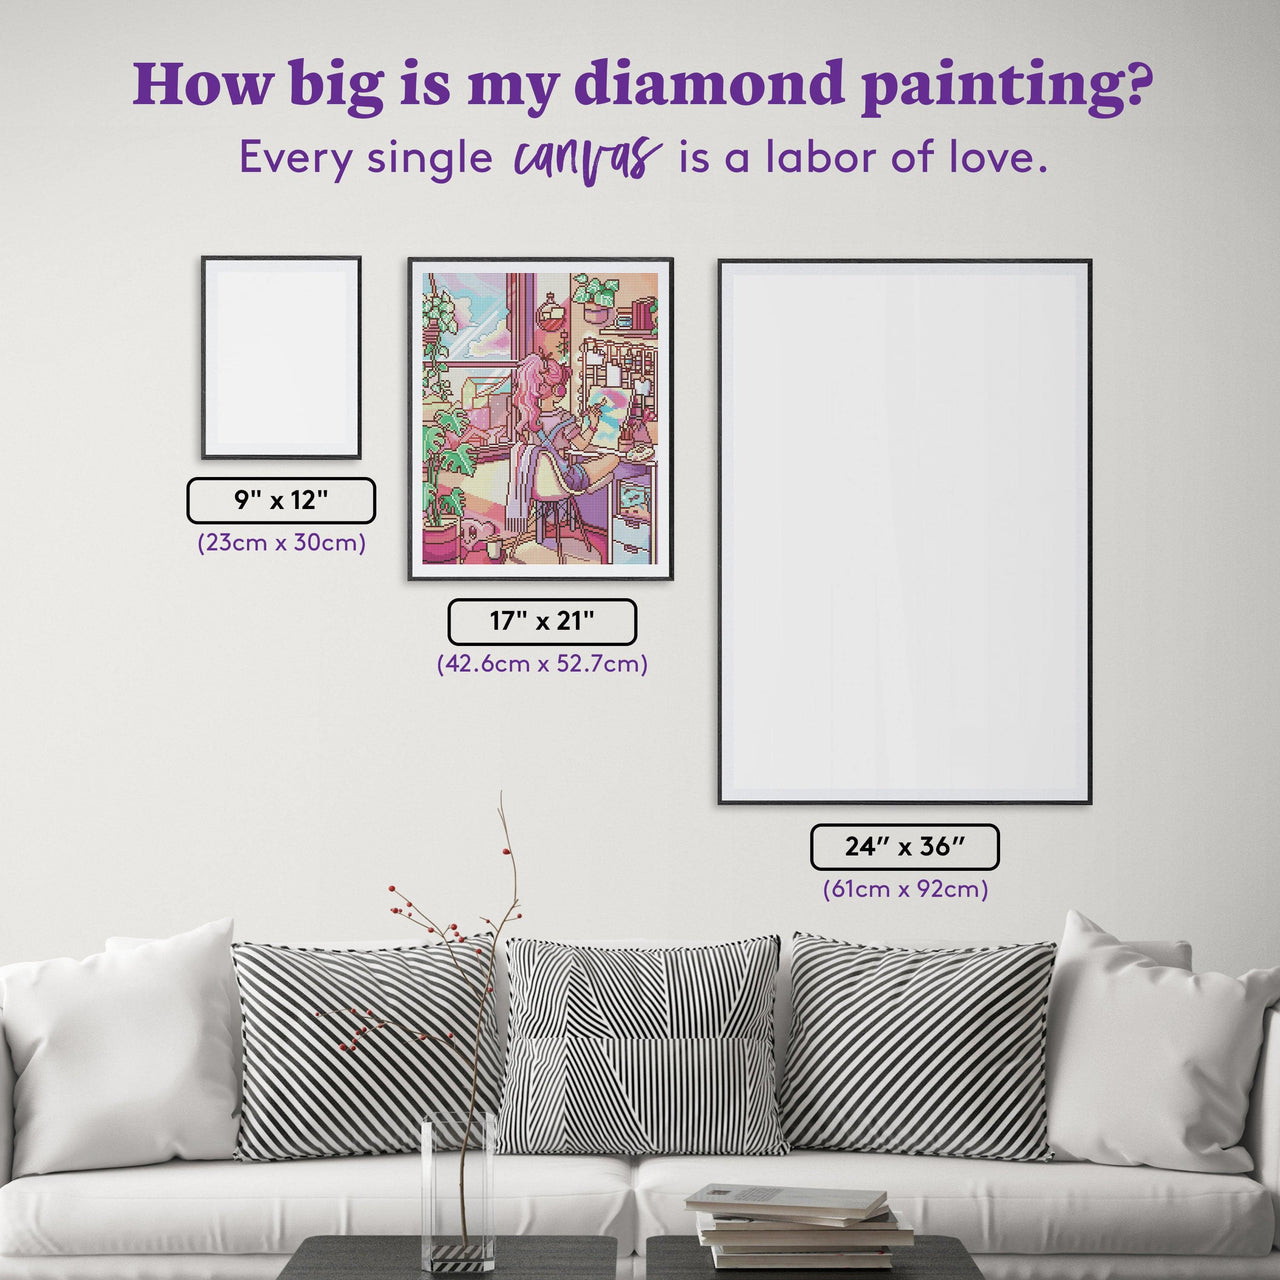 Diamond Painting Artist Room 17" x 21" (42.6cm x 52.7cm) / Round With 46 Colors Including 3 ABs / 28,576